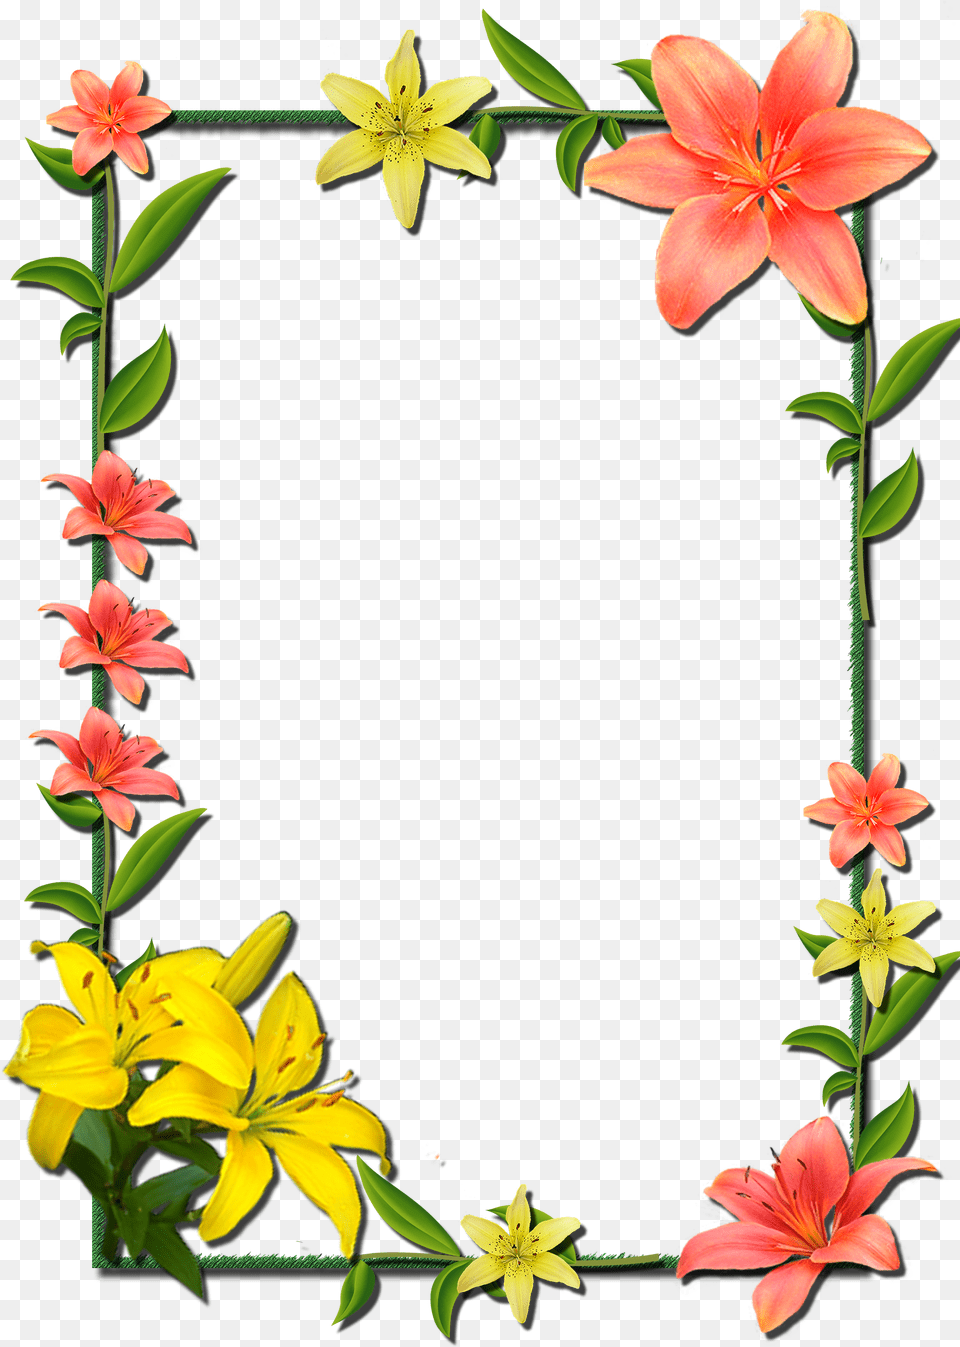 And Picture Flower Frame Frames Borders Hq Flower Frame For Photoshop Png